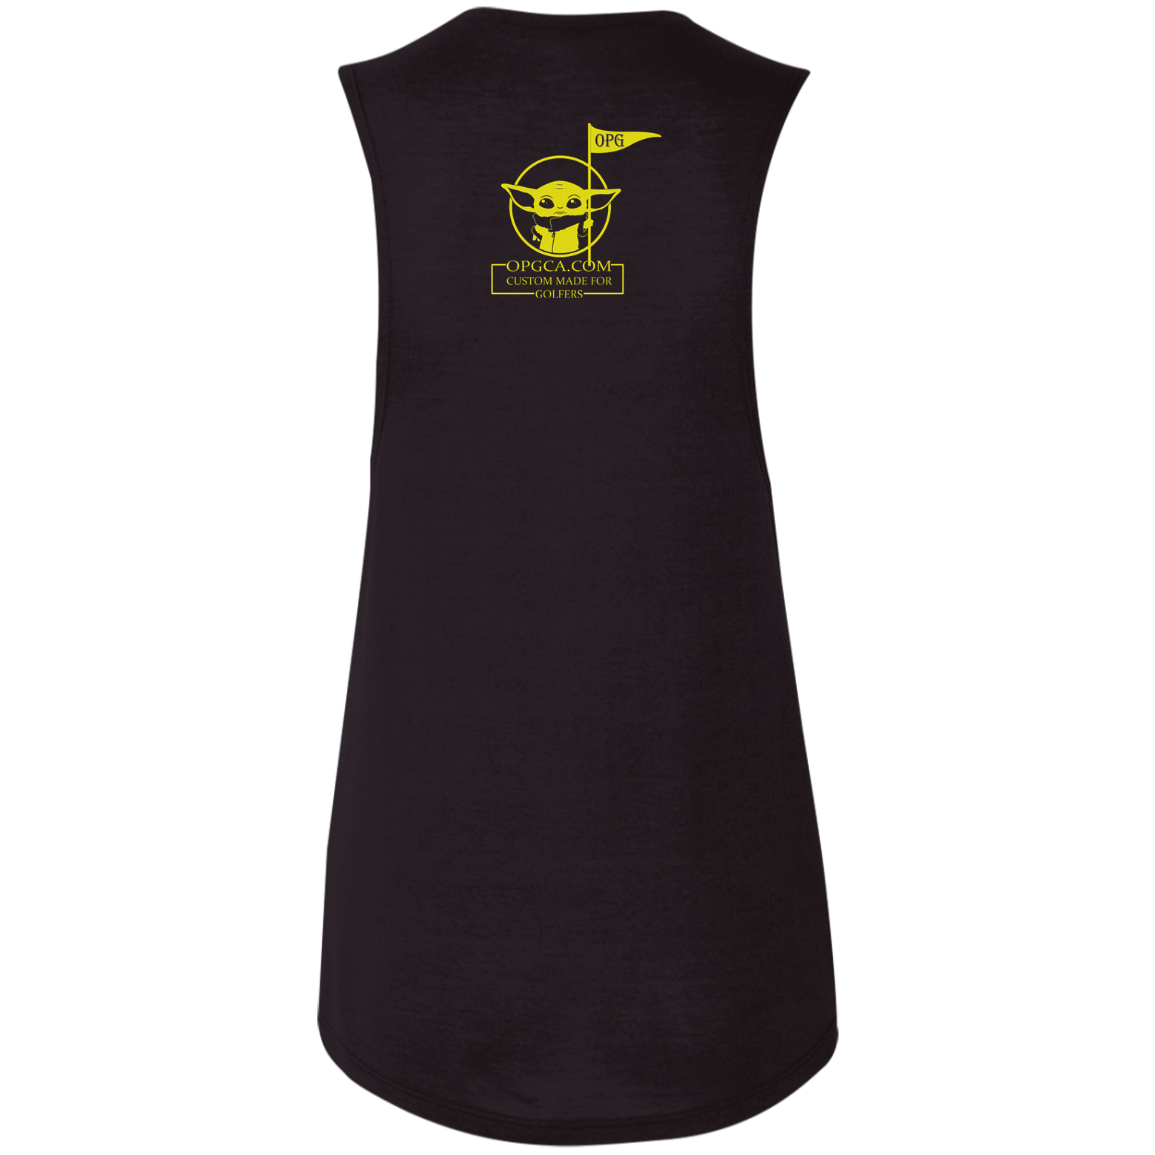 OPG Custom Design #21. May the course be with you. Star Wars Parody and Fan Art. Ladies' Flowy Muscle Tank